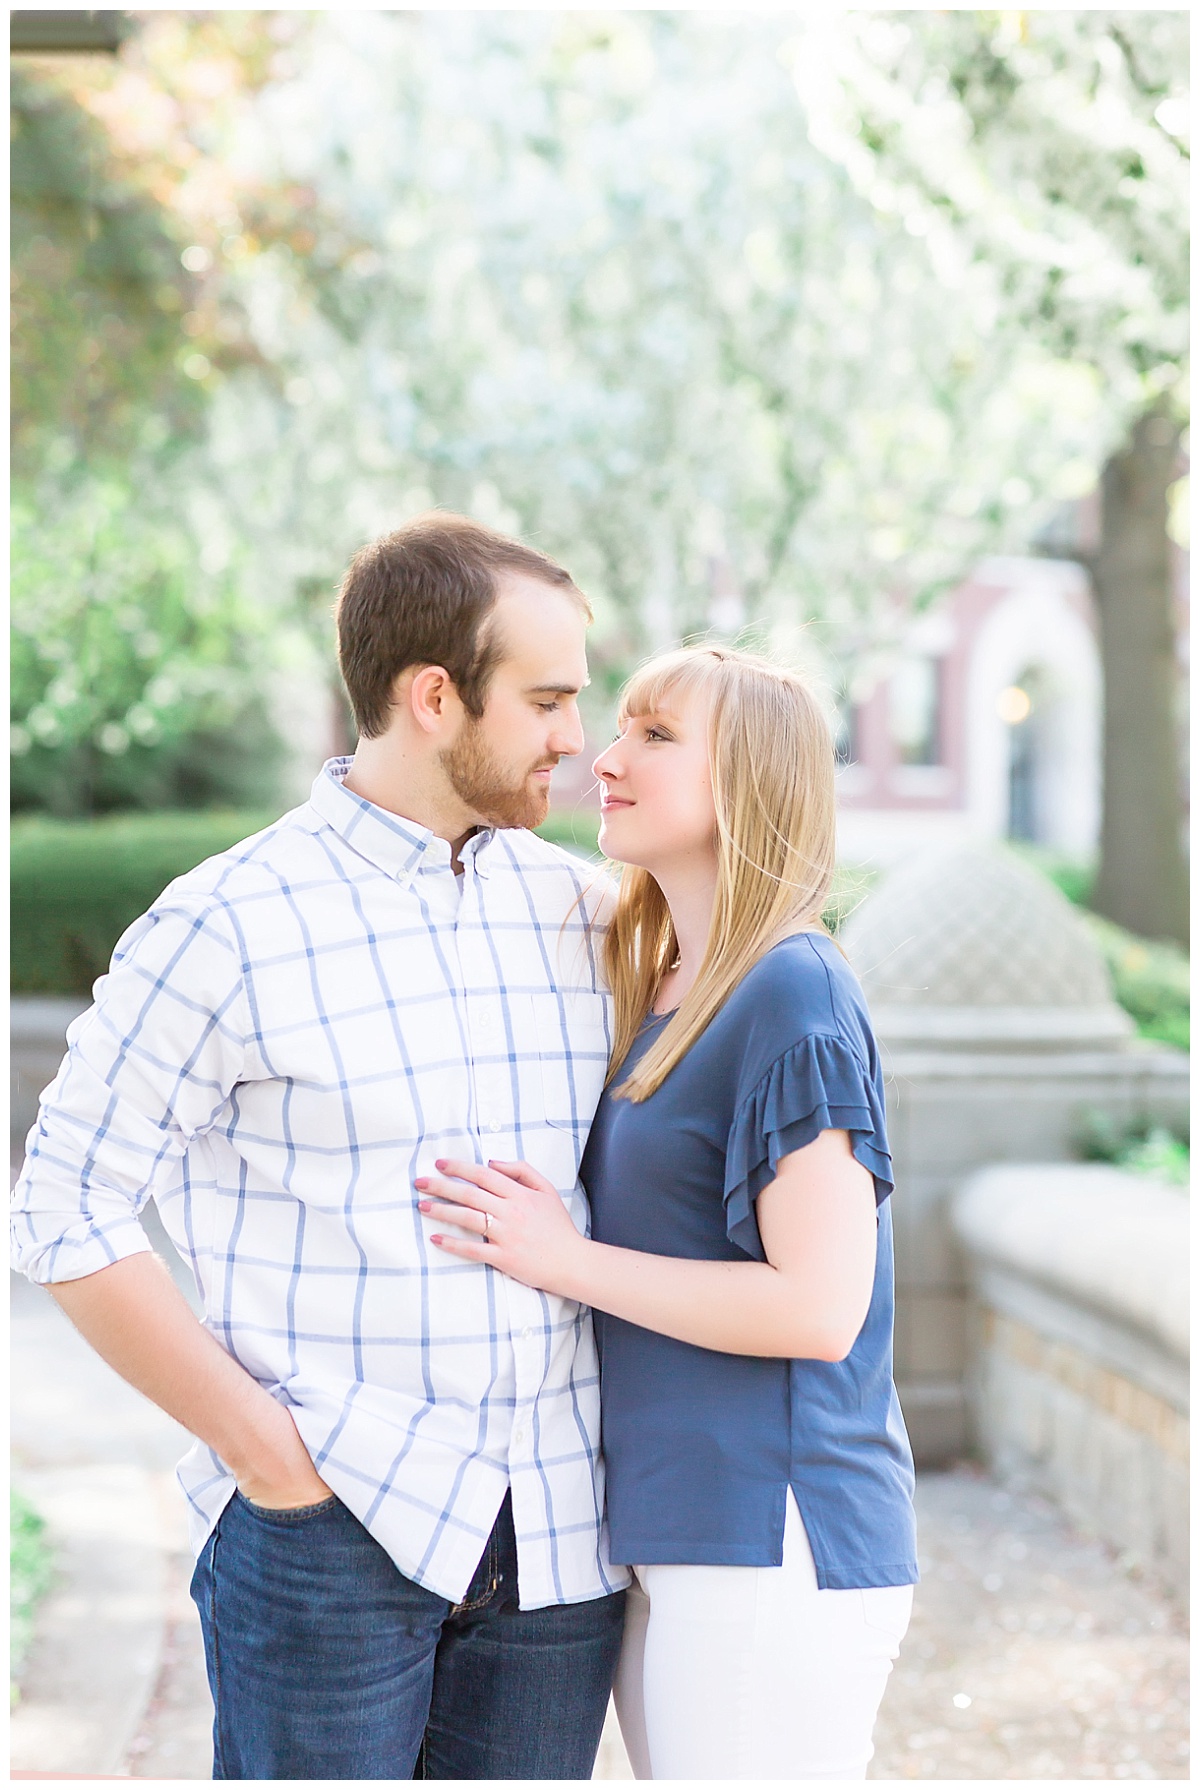 Purdue University spring engagement session photos by Simply Seeking Photography